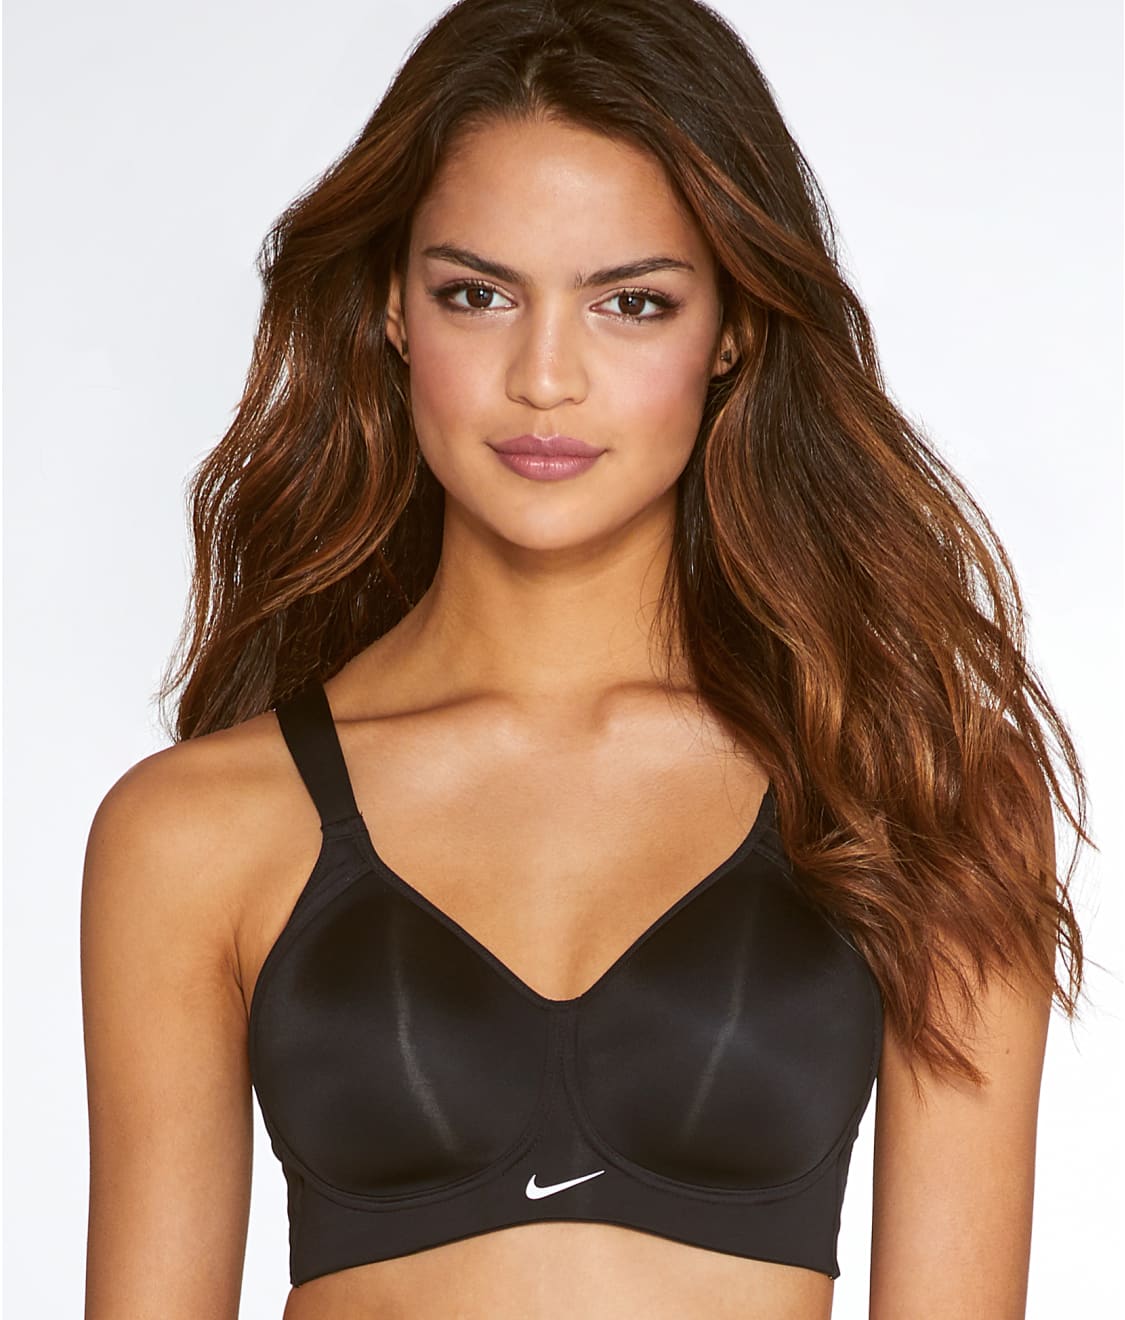 graphic Contaminated Reduction Nike Pro Hero Wire-Free Sports Bra & Reviews | Bare Necessities (Style  805551)